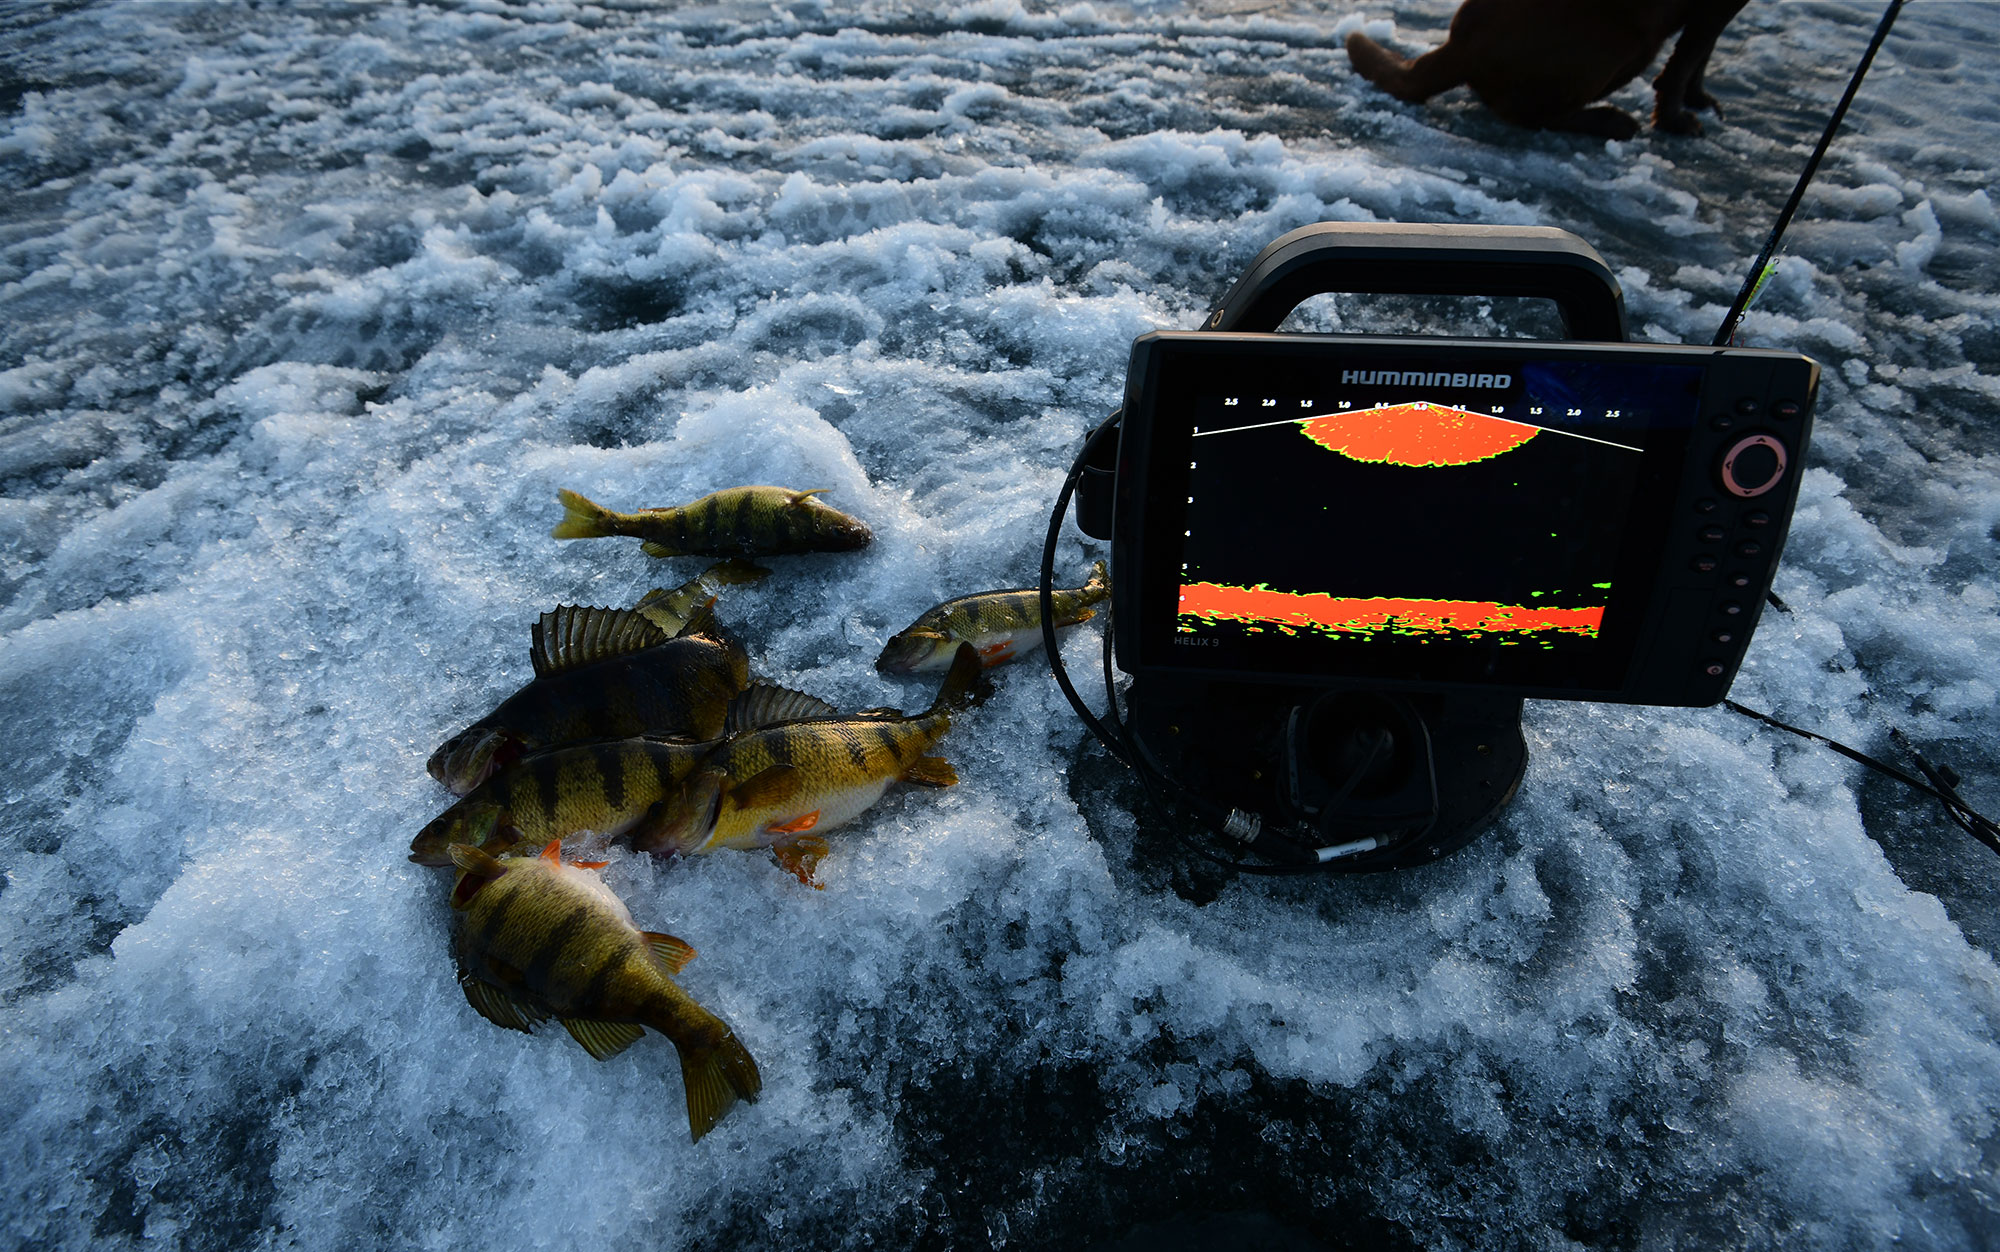 Drill fewer holes and catch more fish with Garmin's new ice fishing bundles